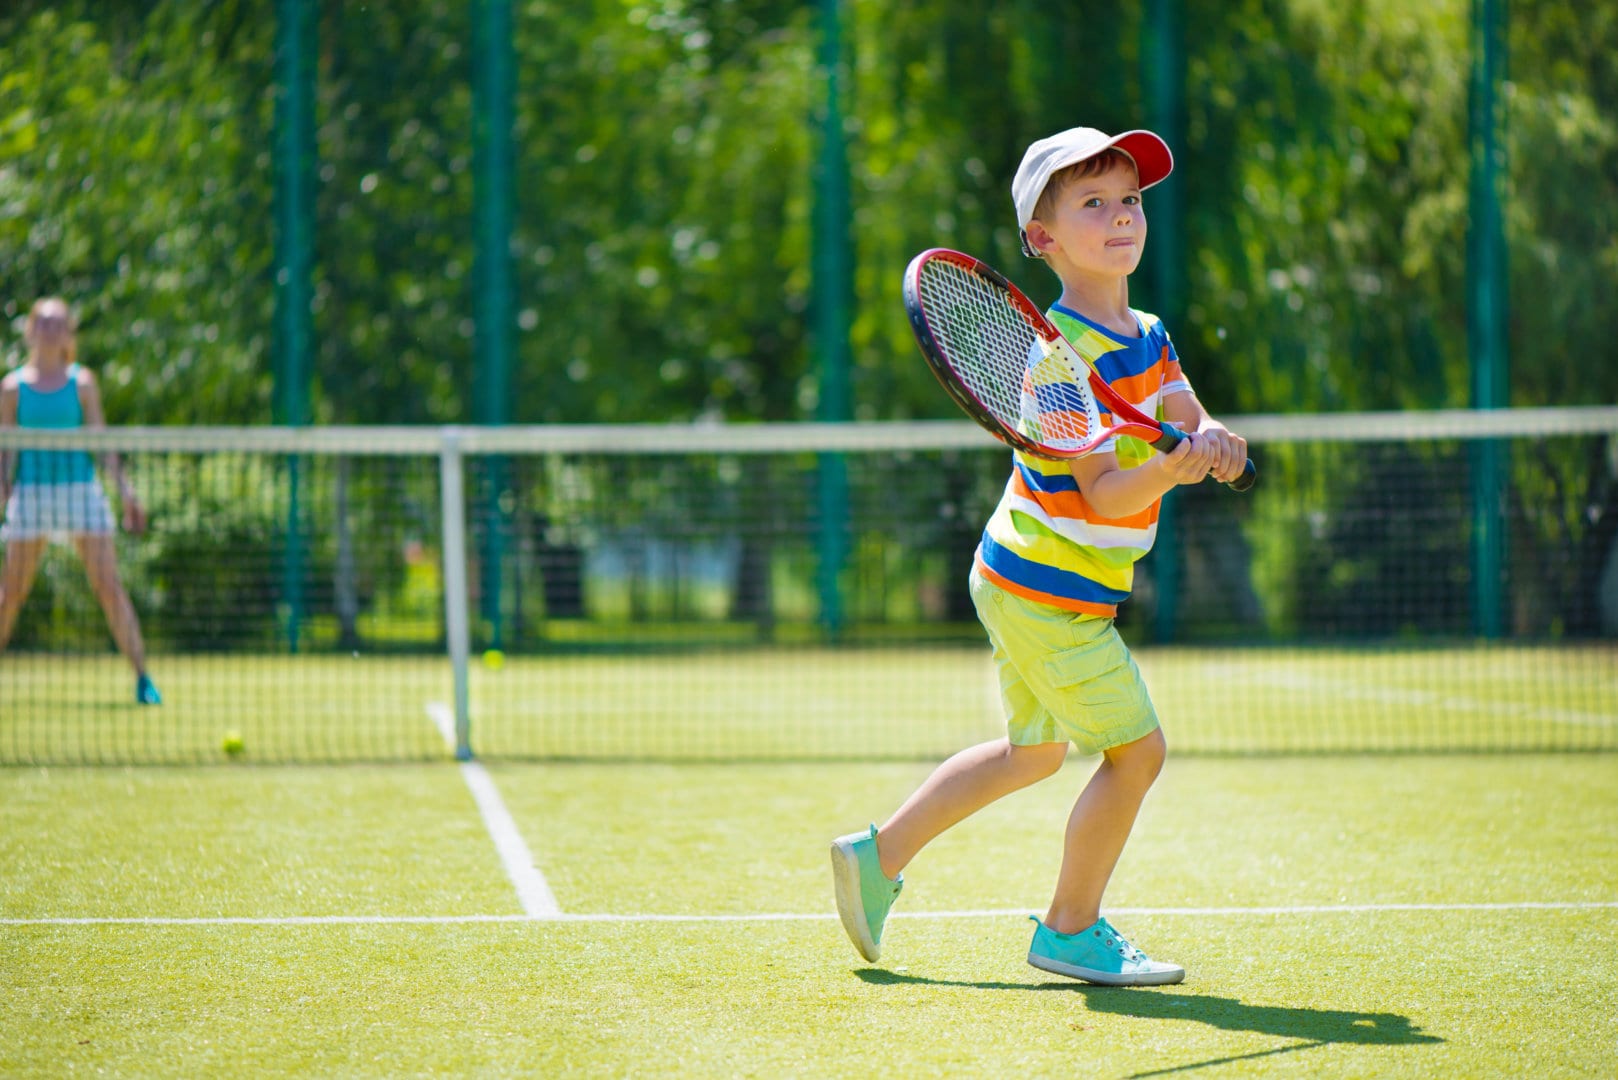 Junior players can safely learn and practice their skills